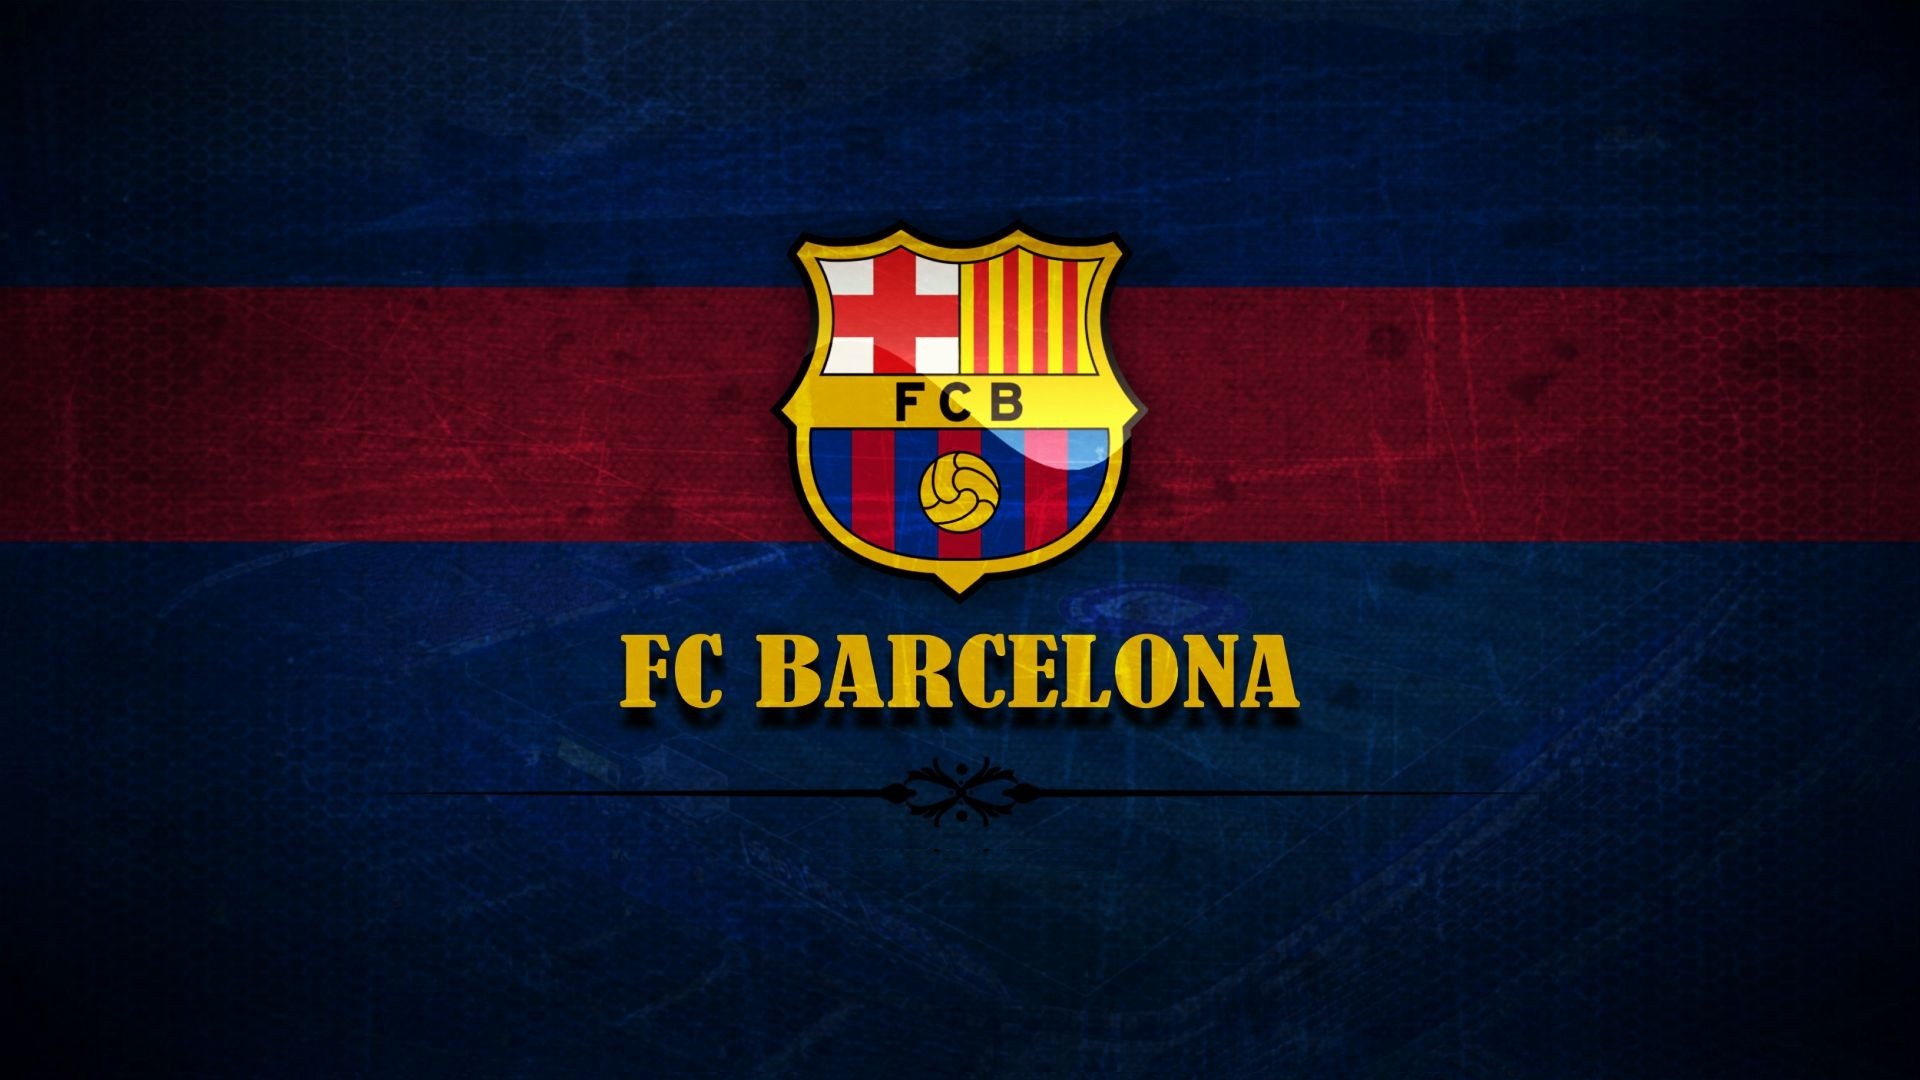 Barcelona Logo Wallpaper HD with high-resolution 1920x1080 pixel. You can use this wallpaper for your Desktop Computers, Mac Screensavers, Windows Backgrounds, iPhone Wallpapers, Tablet or Android Lock screen and another Mobile device